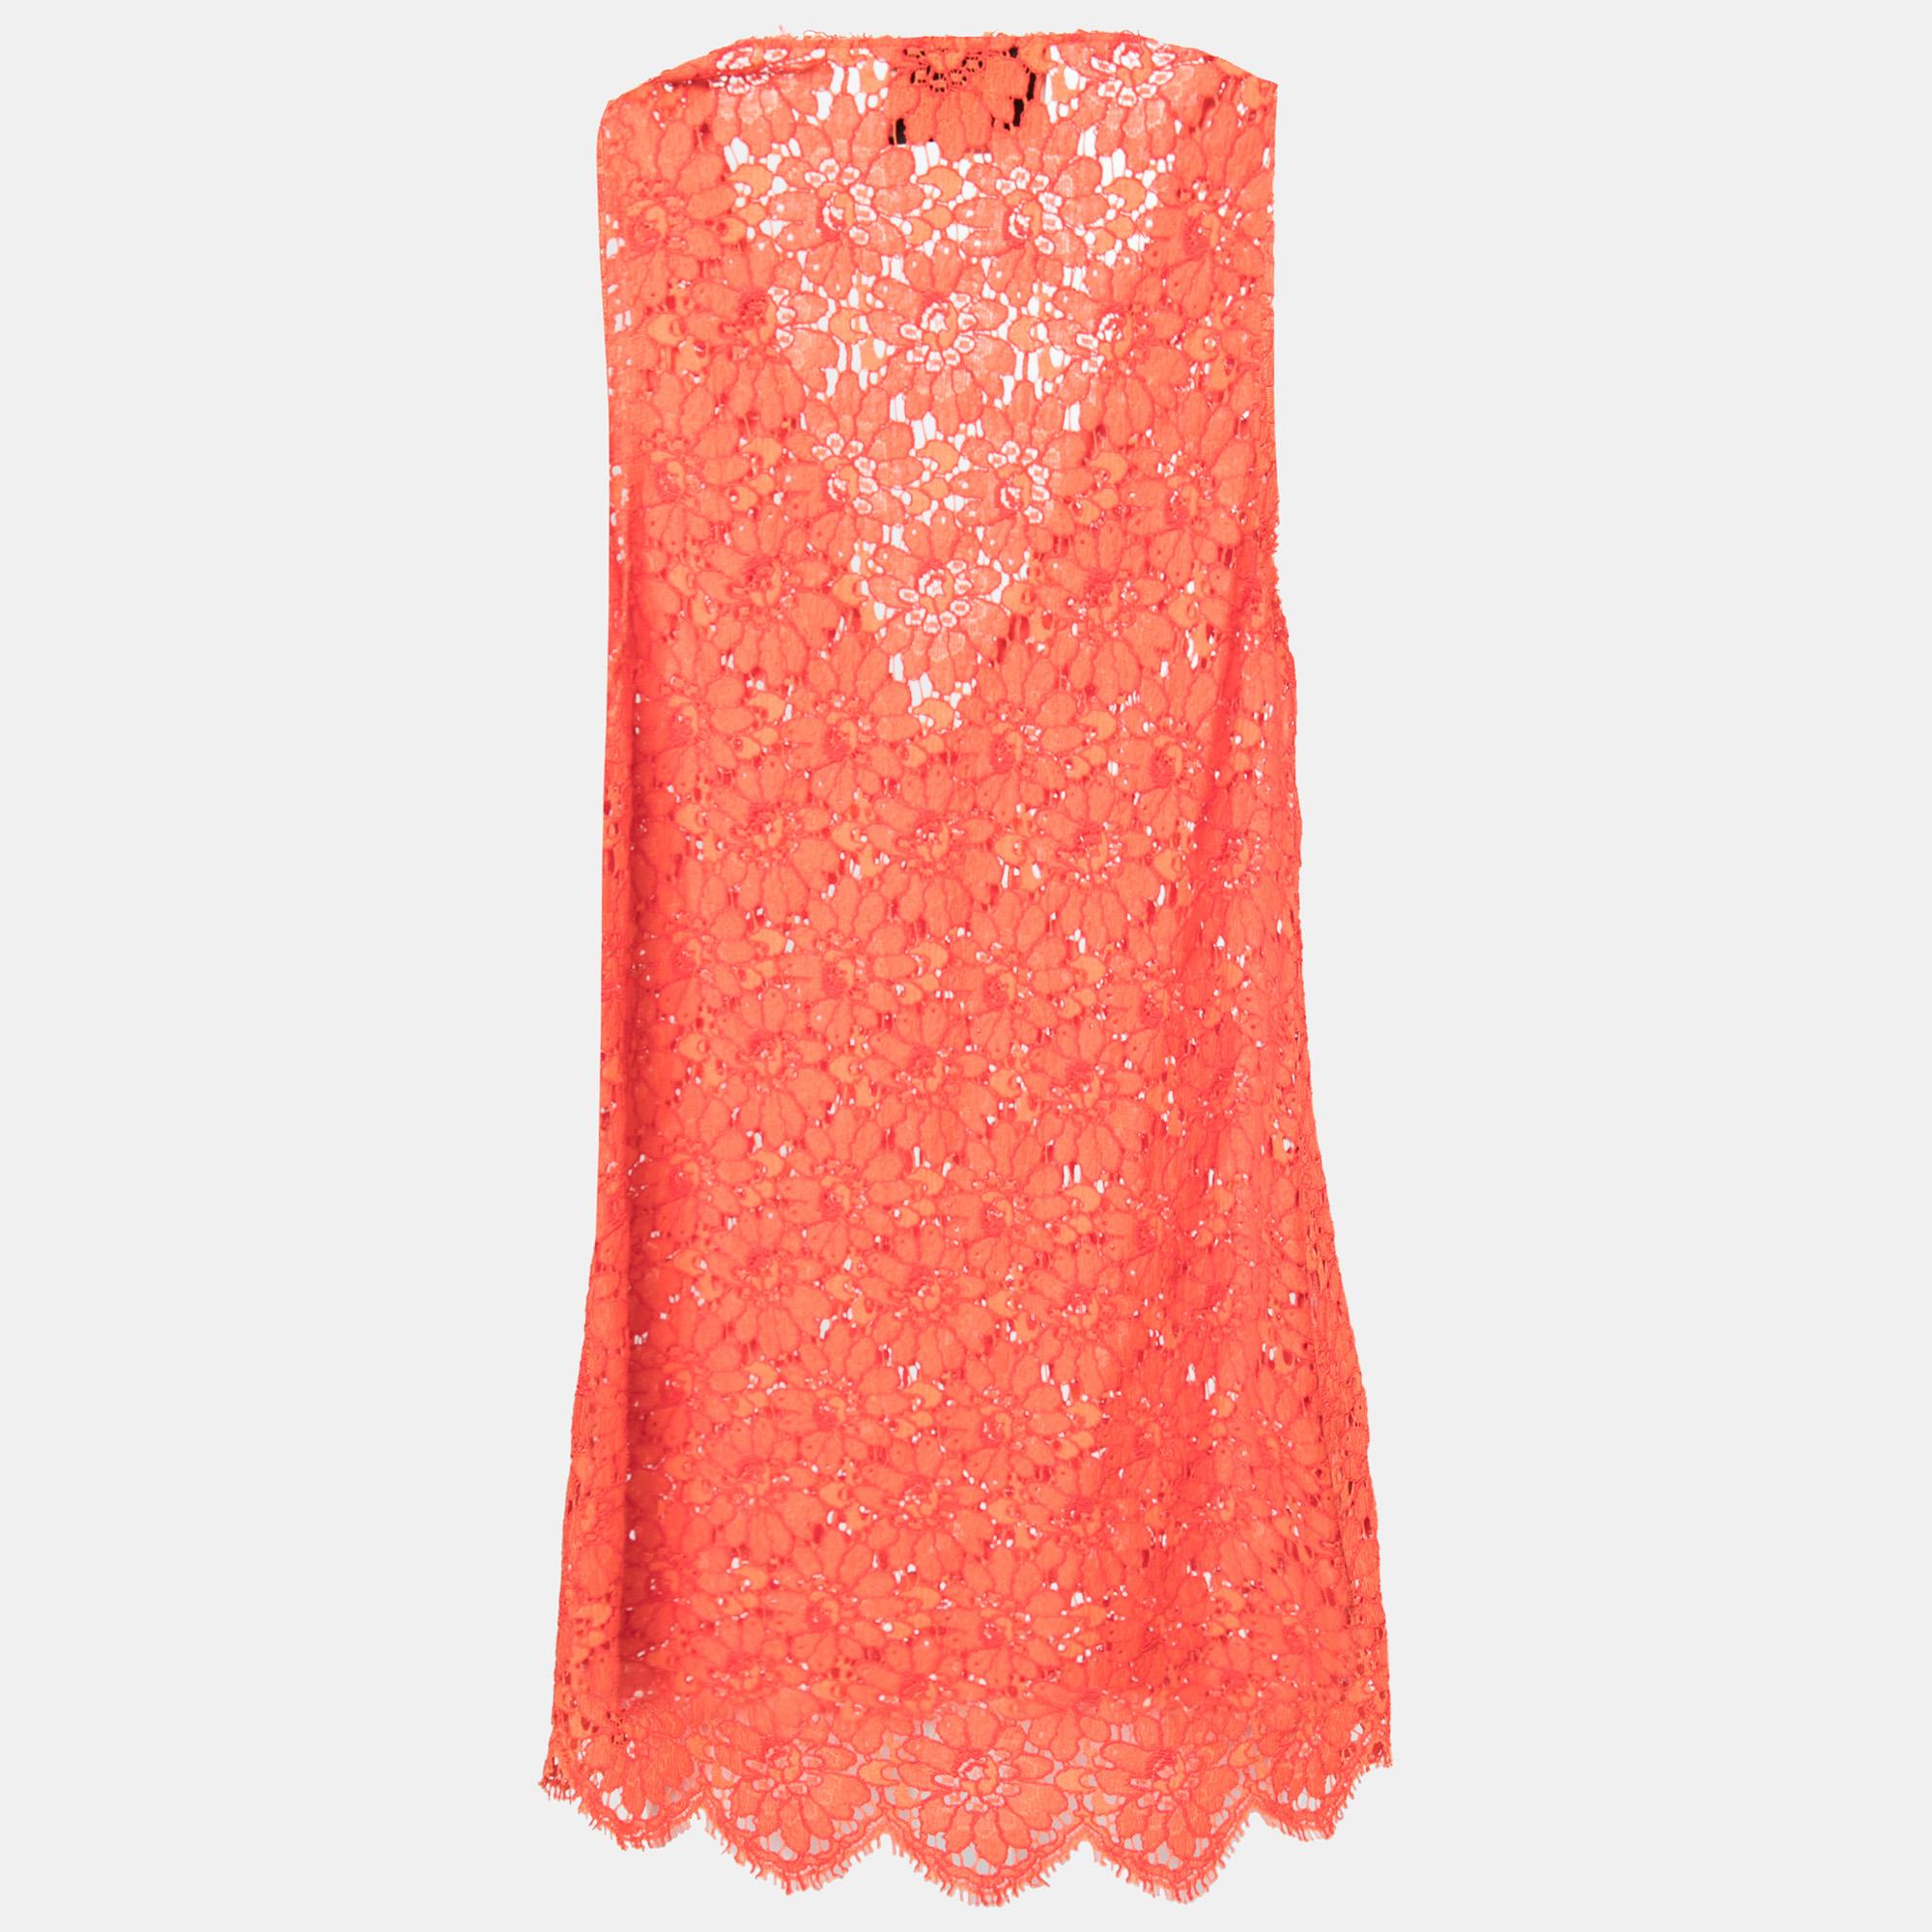 Intricately fashioned into a chic lacy silhouette, this top from the House of Gucci is a gorgeous creation you don't want to miss! It is stitched using orange floral lace and flaunts a sleeveless style and V-shaped neckline. Wear this top with a